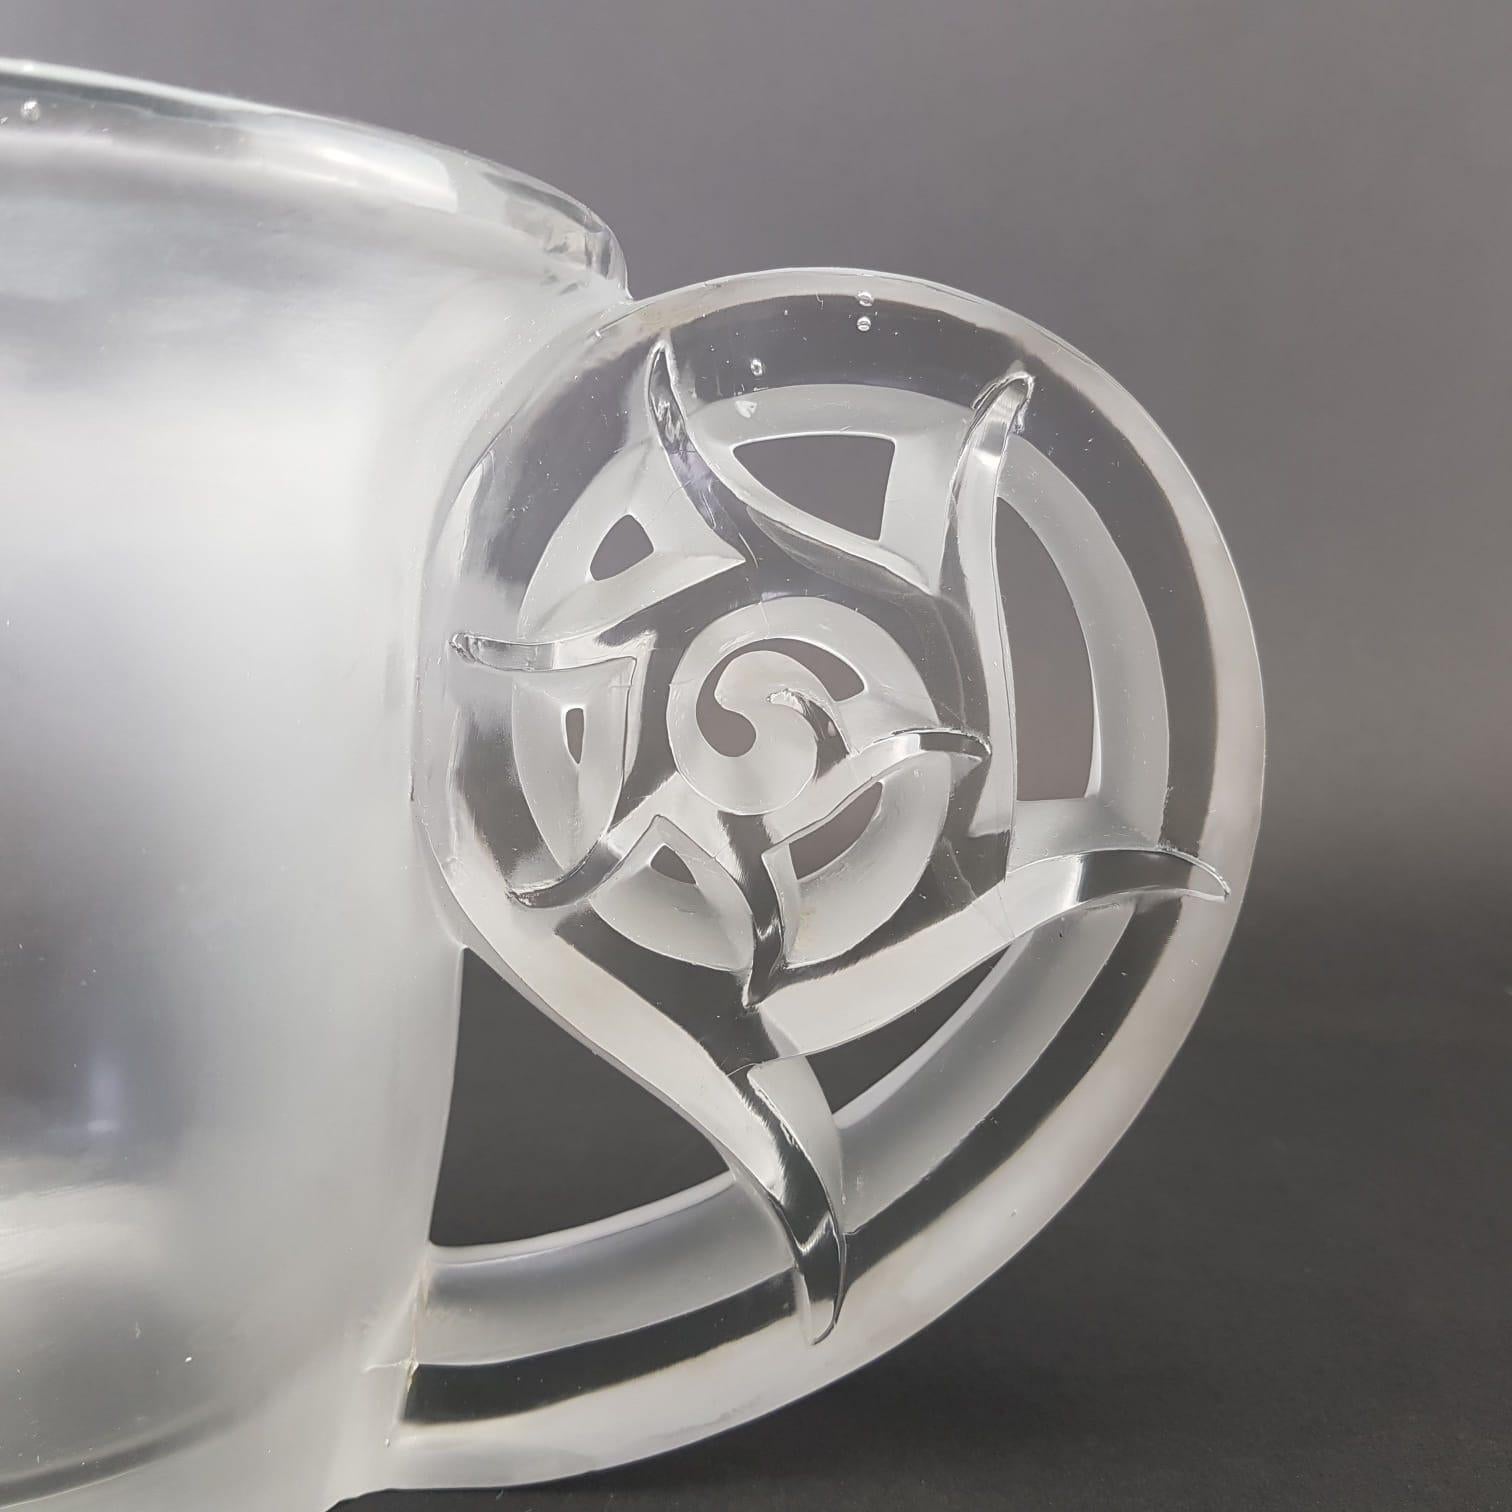 French 1926 Rene Lalique Pierrefonds Vase in Clear and Acid Satin Finish Glass